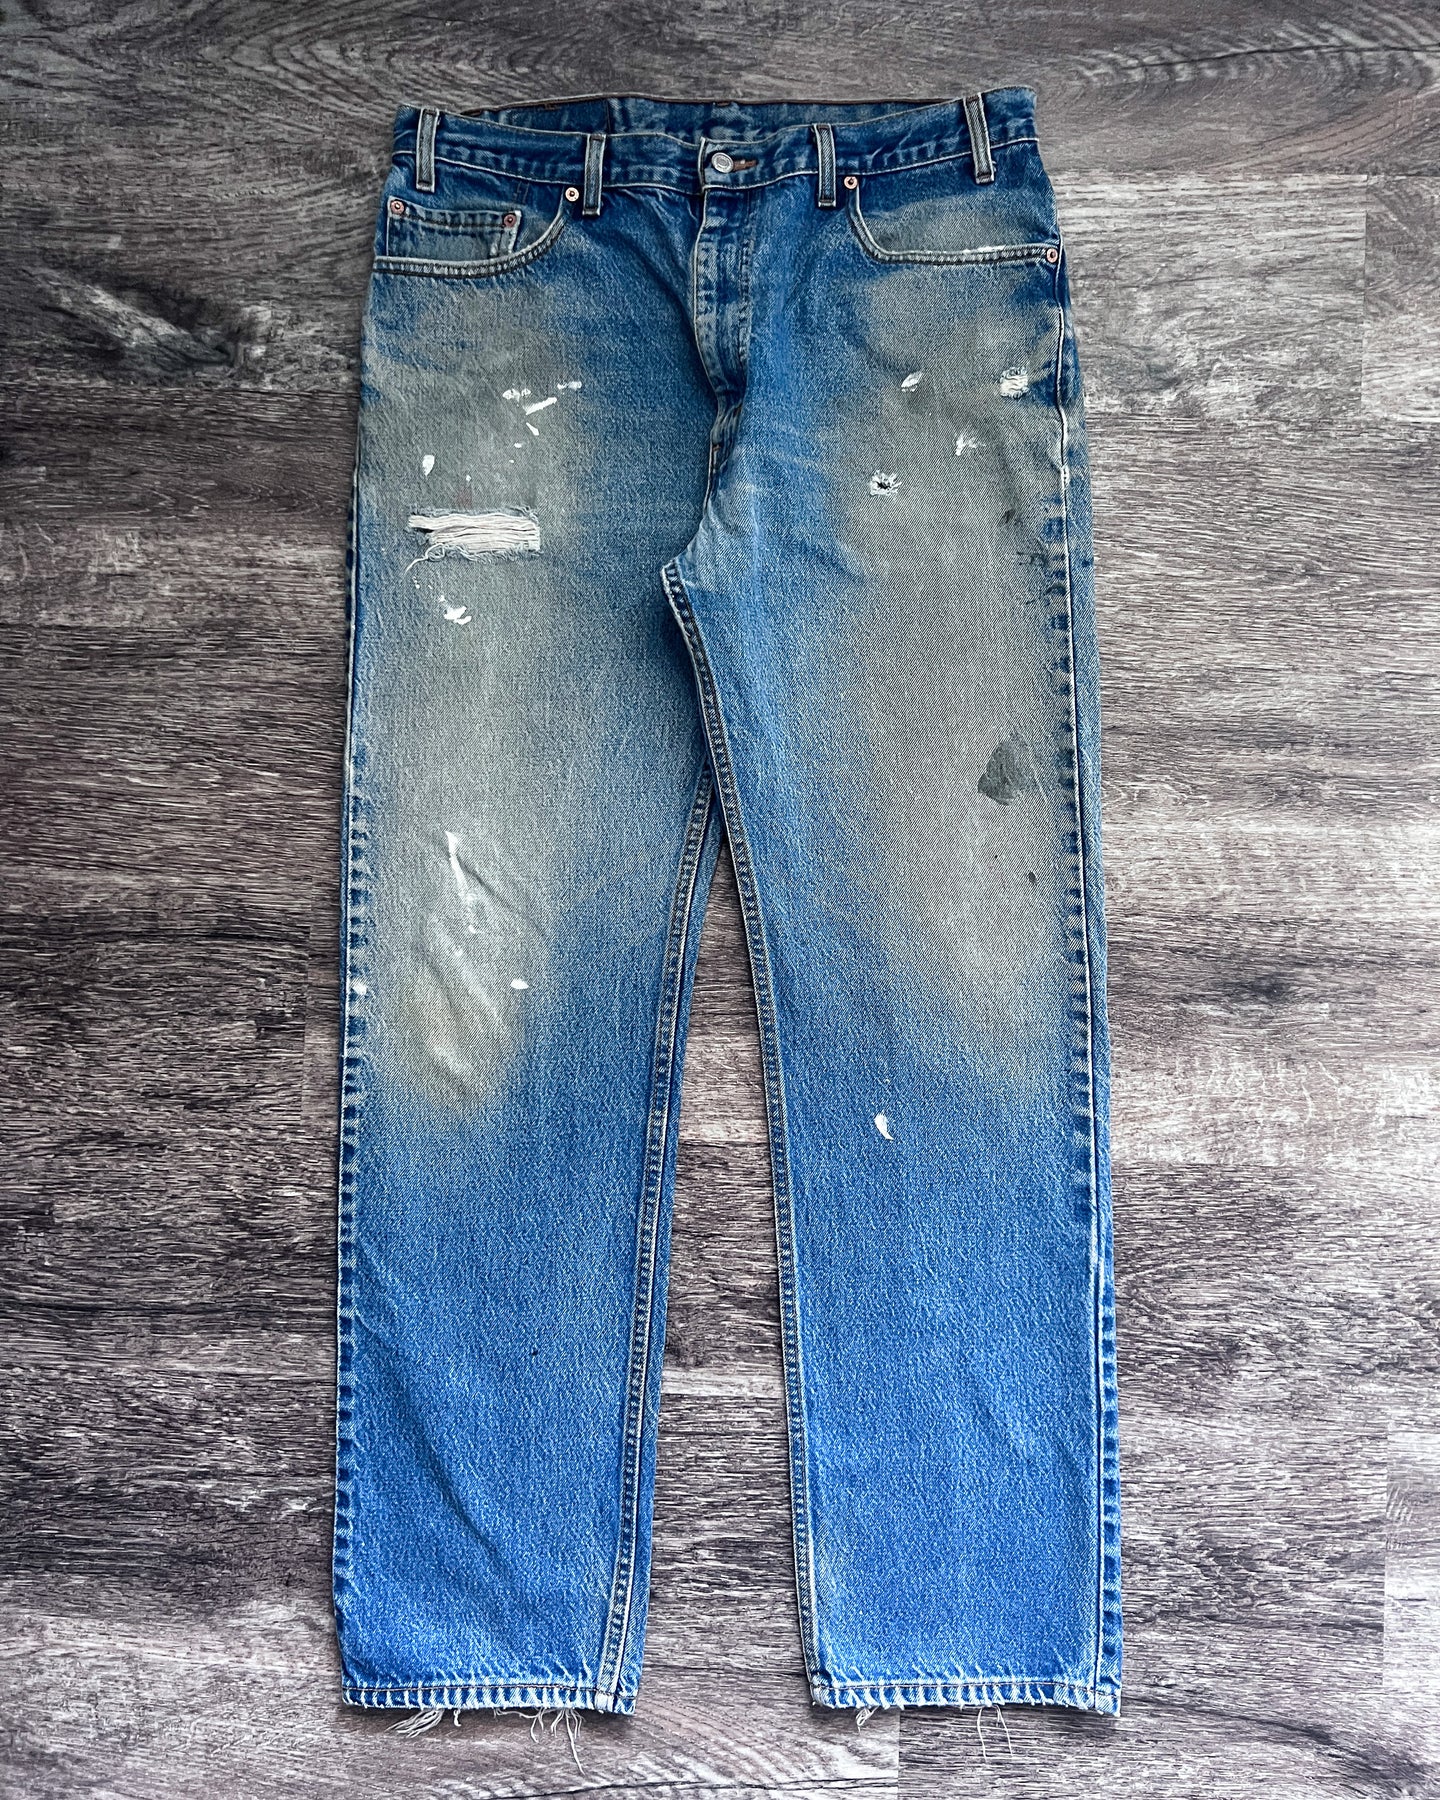 1990s Levi's Well Worn 505 - Size 36 x 32